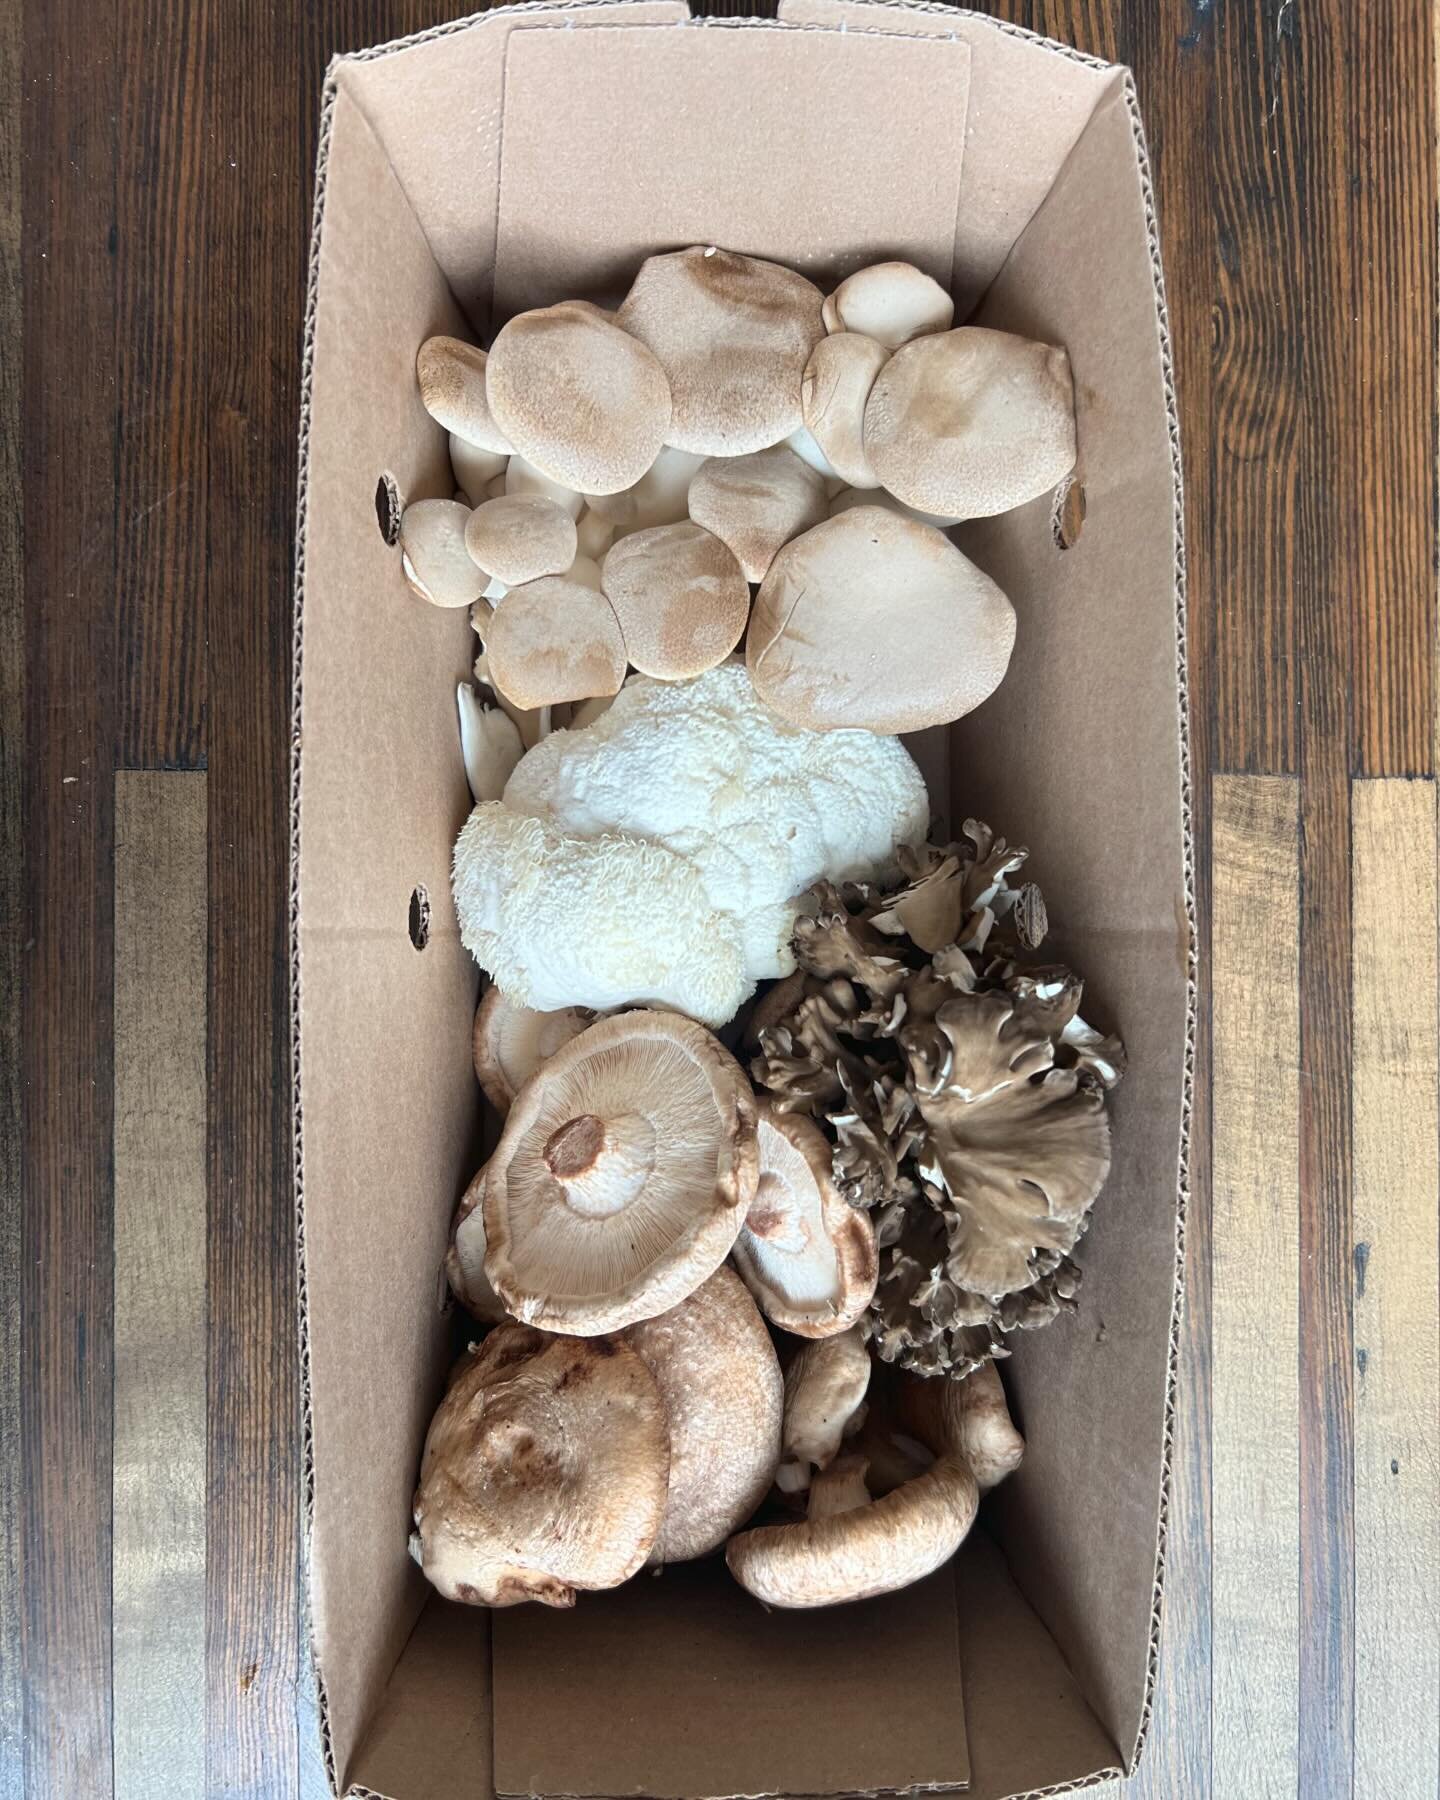 A #ShroomsterBox is our pride and joy. Stop by today and grab a box or two in #YQG from 10-12 and #Detroit 2-4. Stop on by and let&rsquo;s chat #mushrooms!